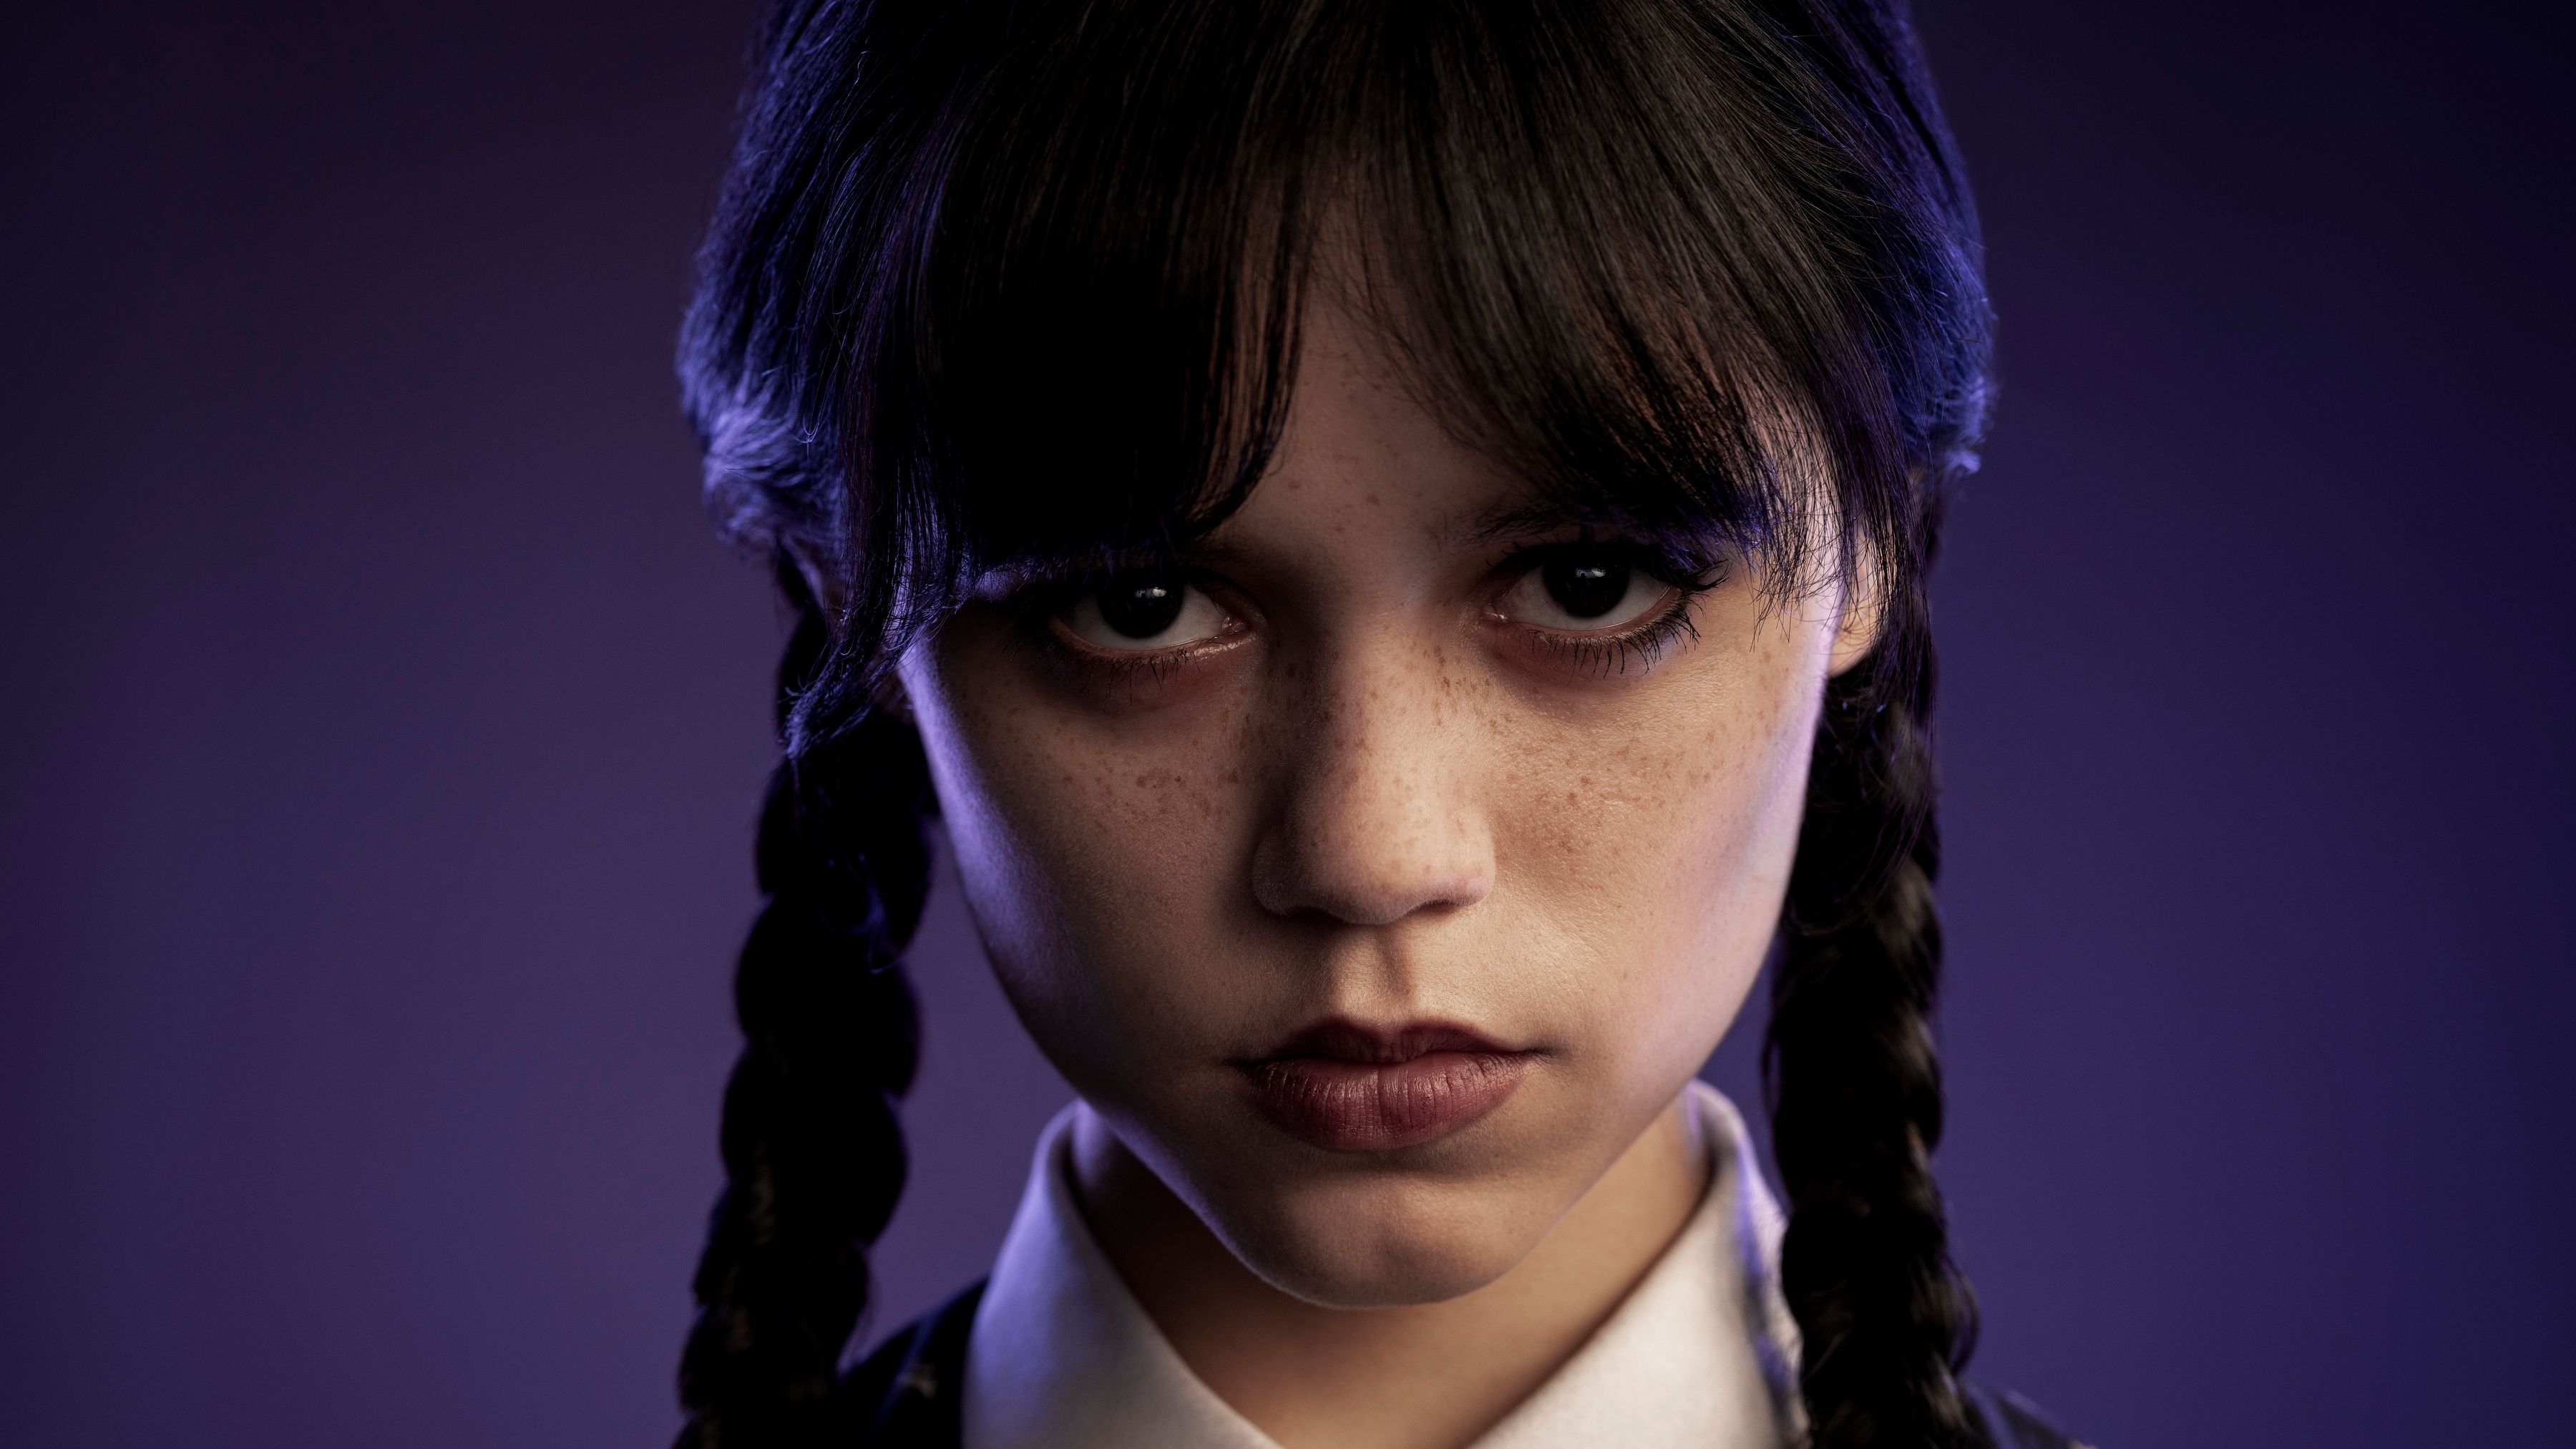 Burton Reveals The Making of Wednesday Addams in Behind The Scenes Video -  Netflix Tudum